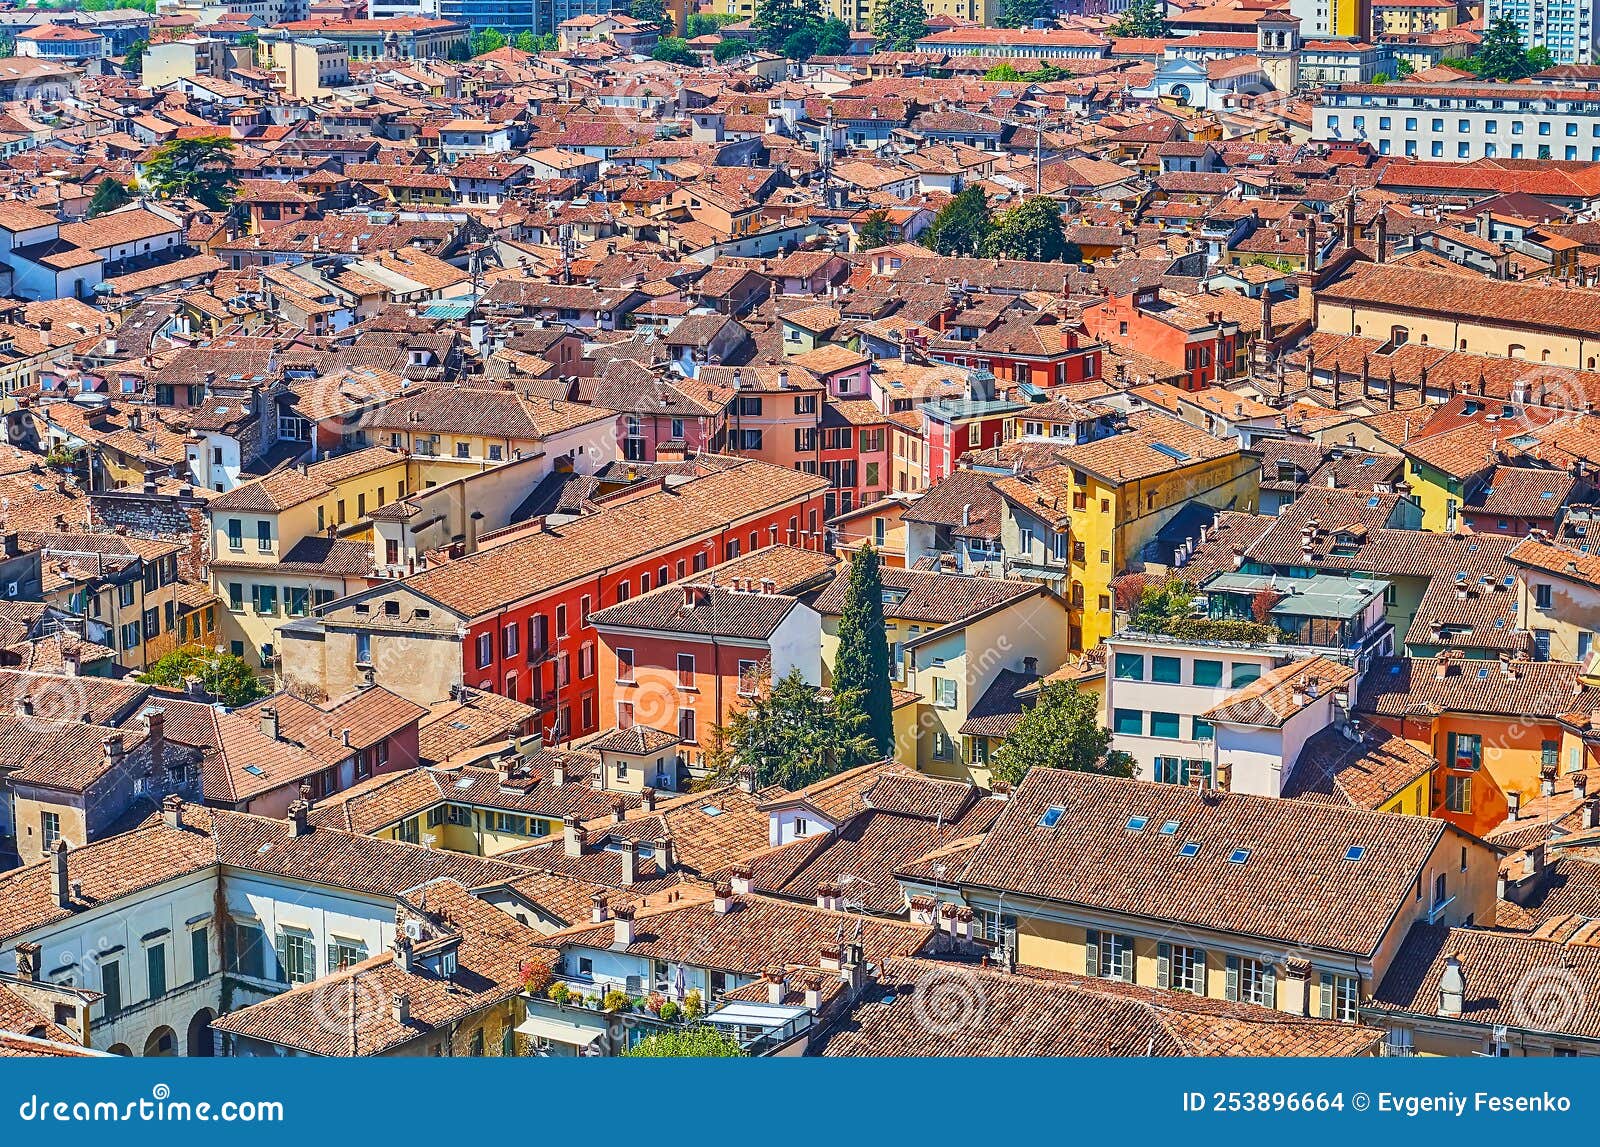 the old housing of brescia from cidneo hill, italy